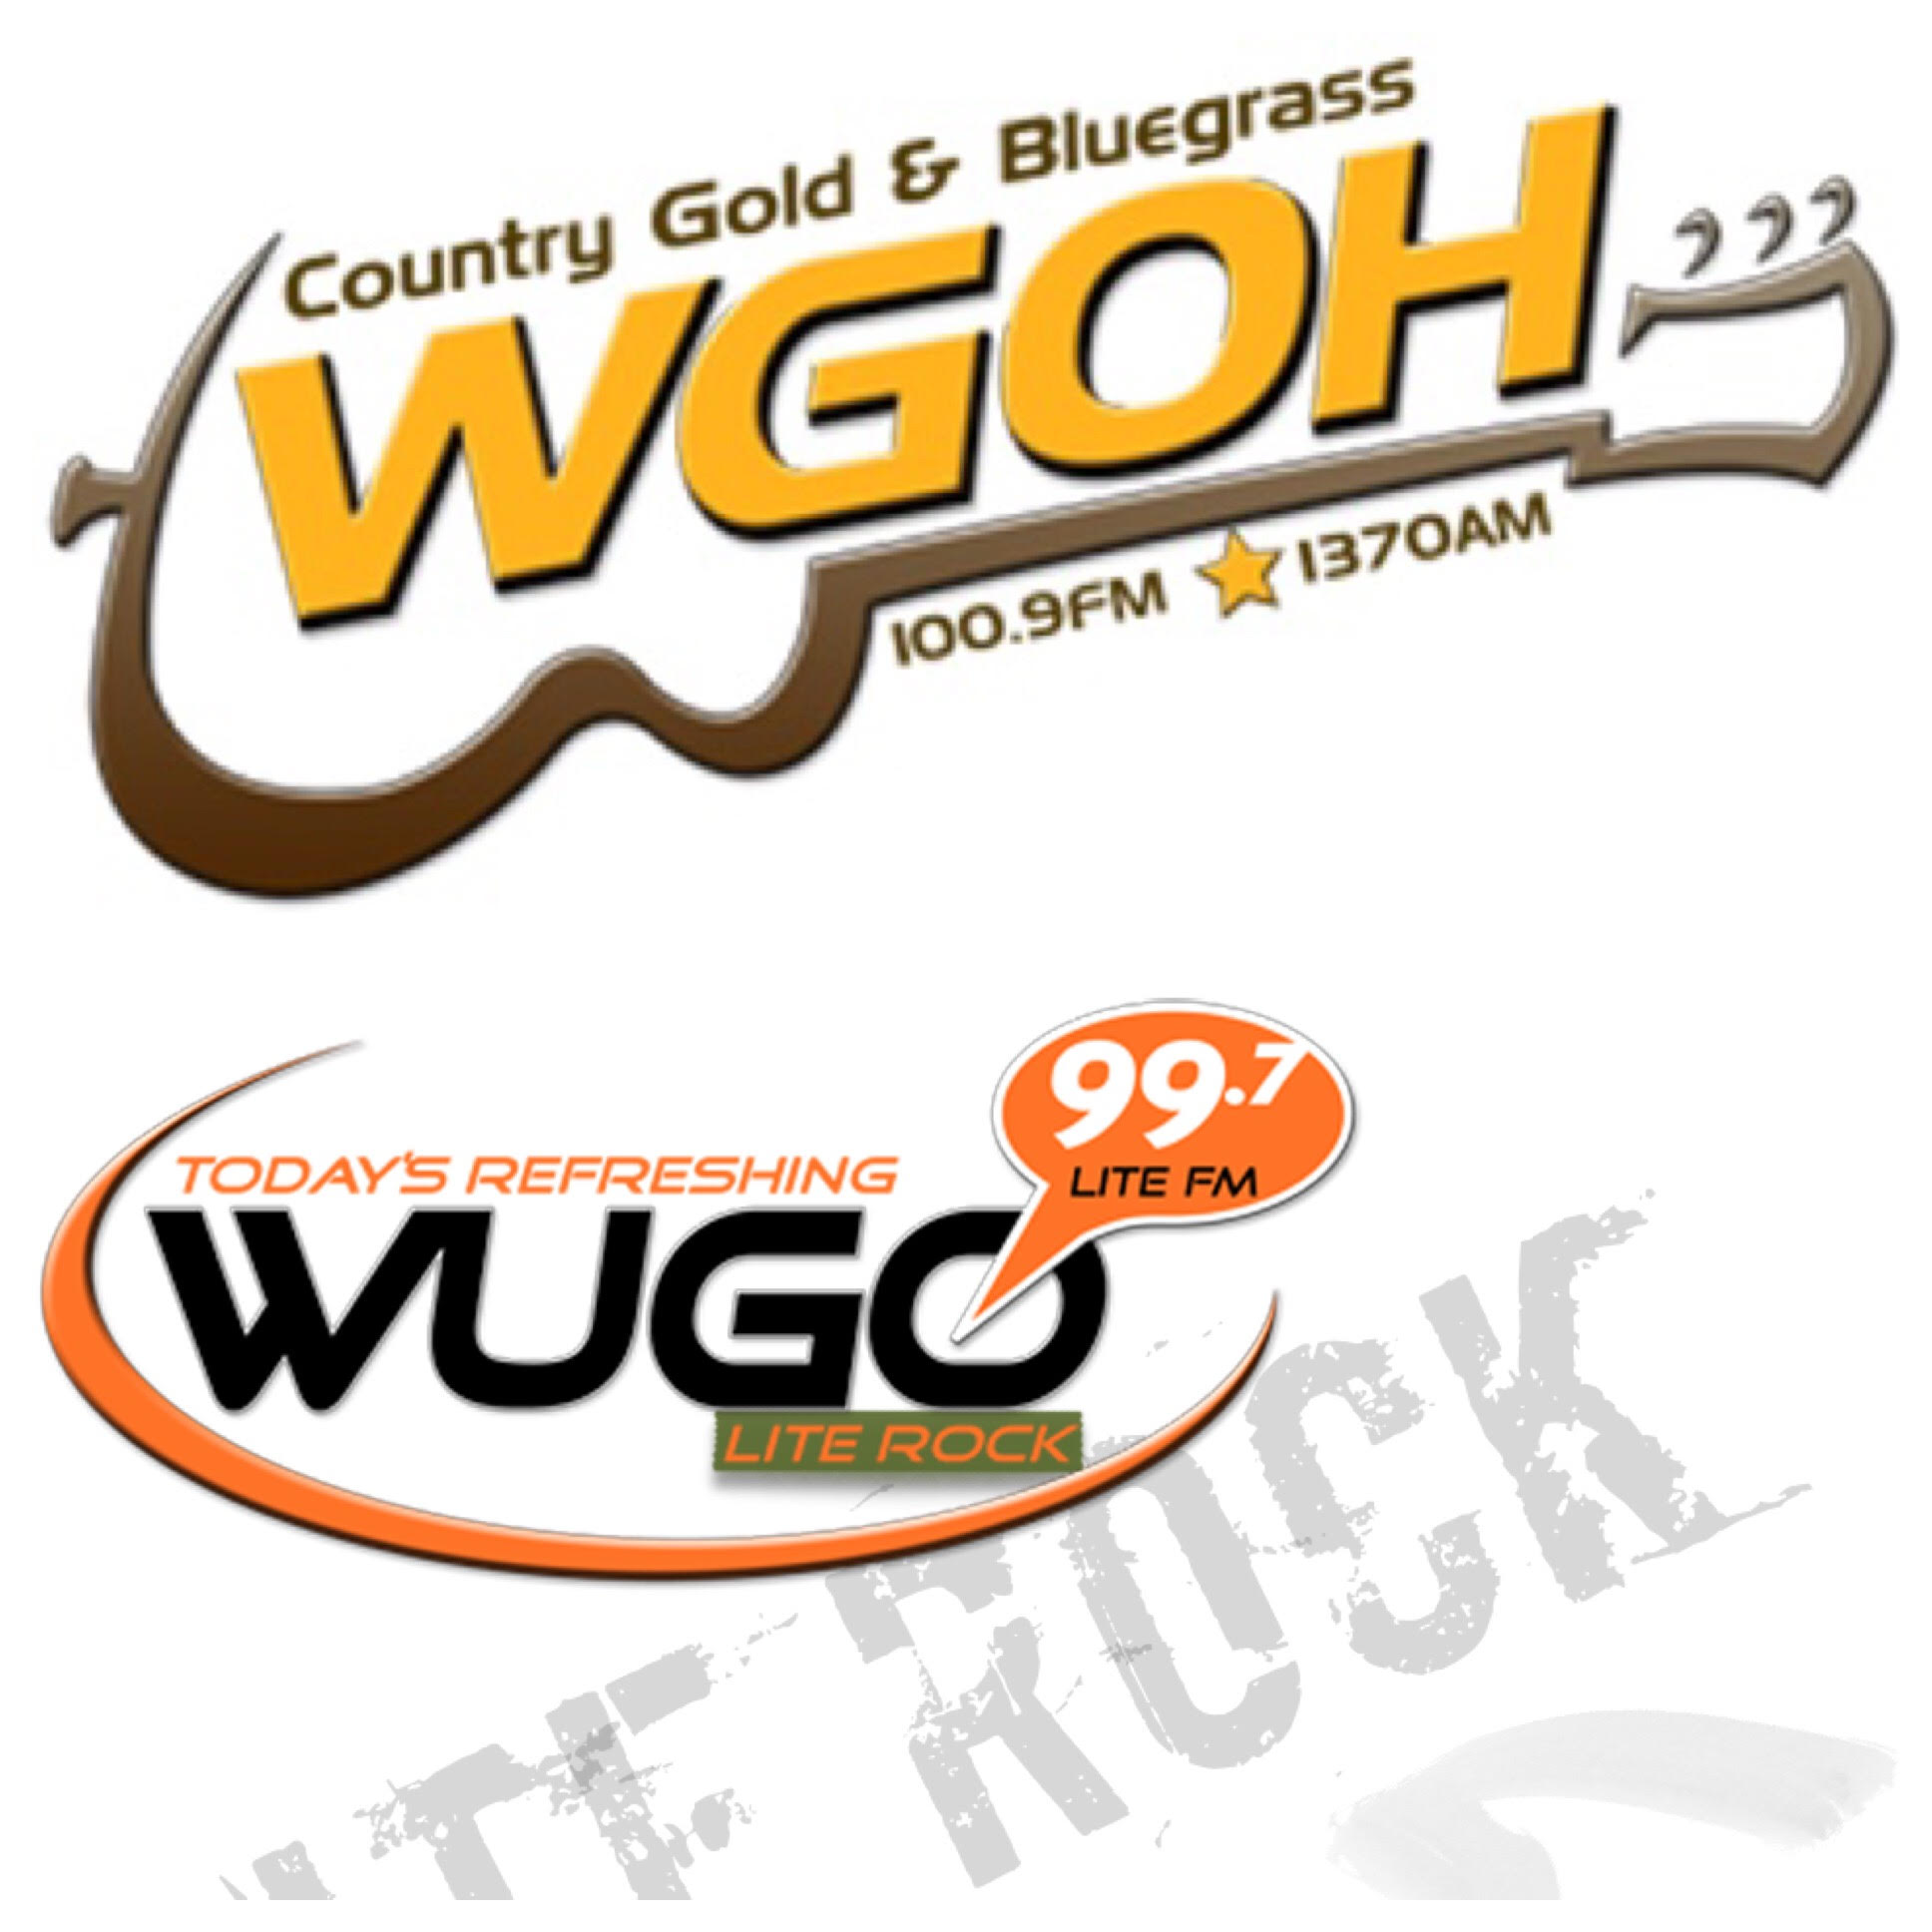 WGOH 100.9FM - 1370AM - Country Gold & Bluegrass - Today's Refreshing WUGO Lite Rock - 99.7 Lite FM